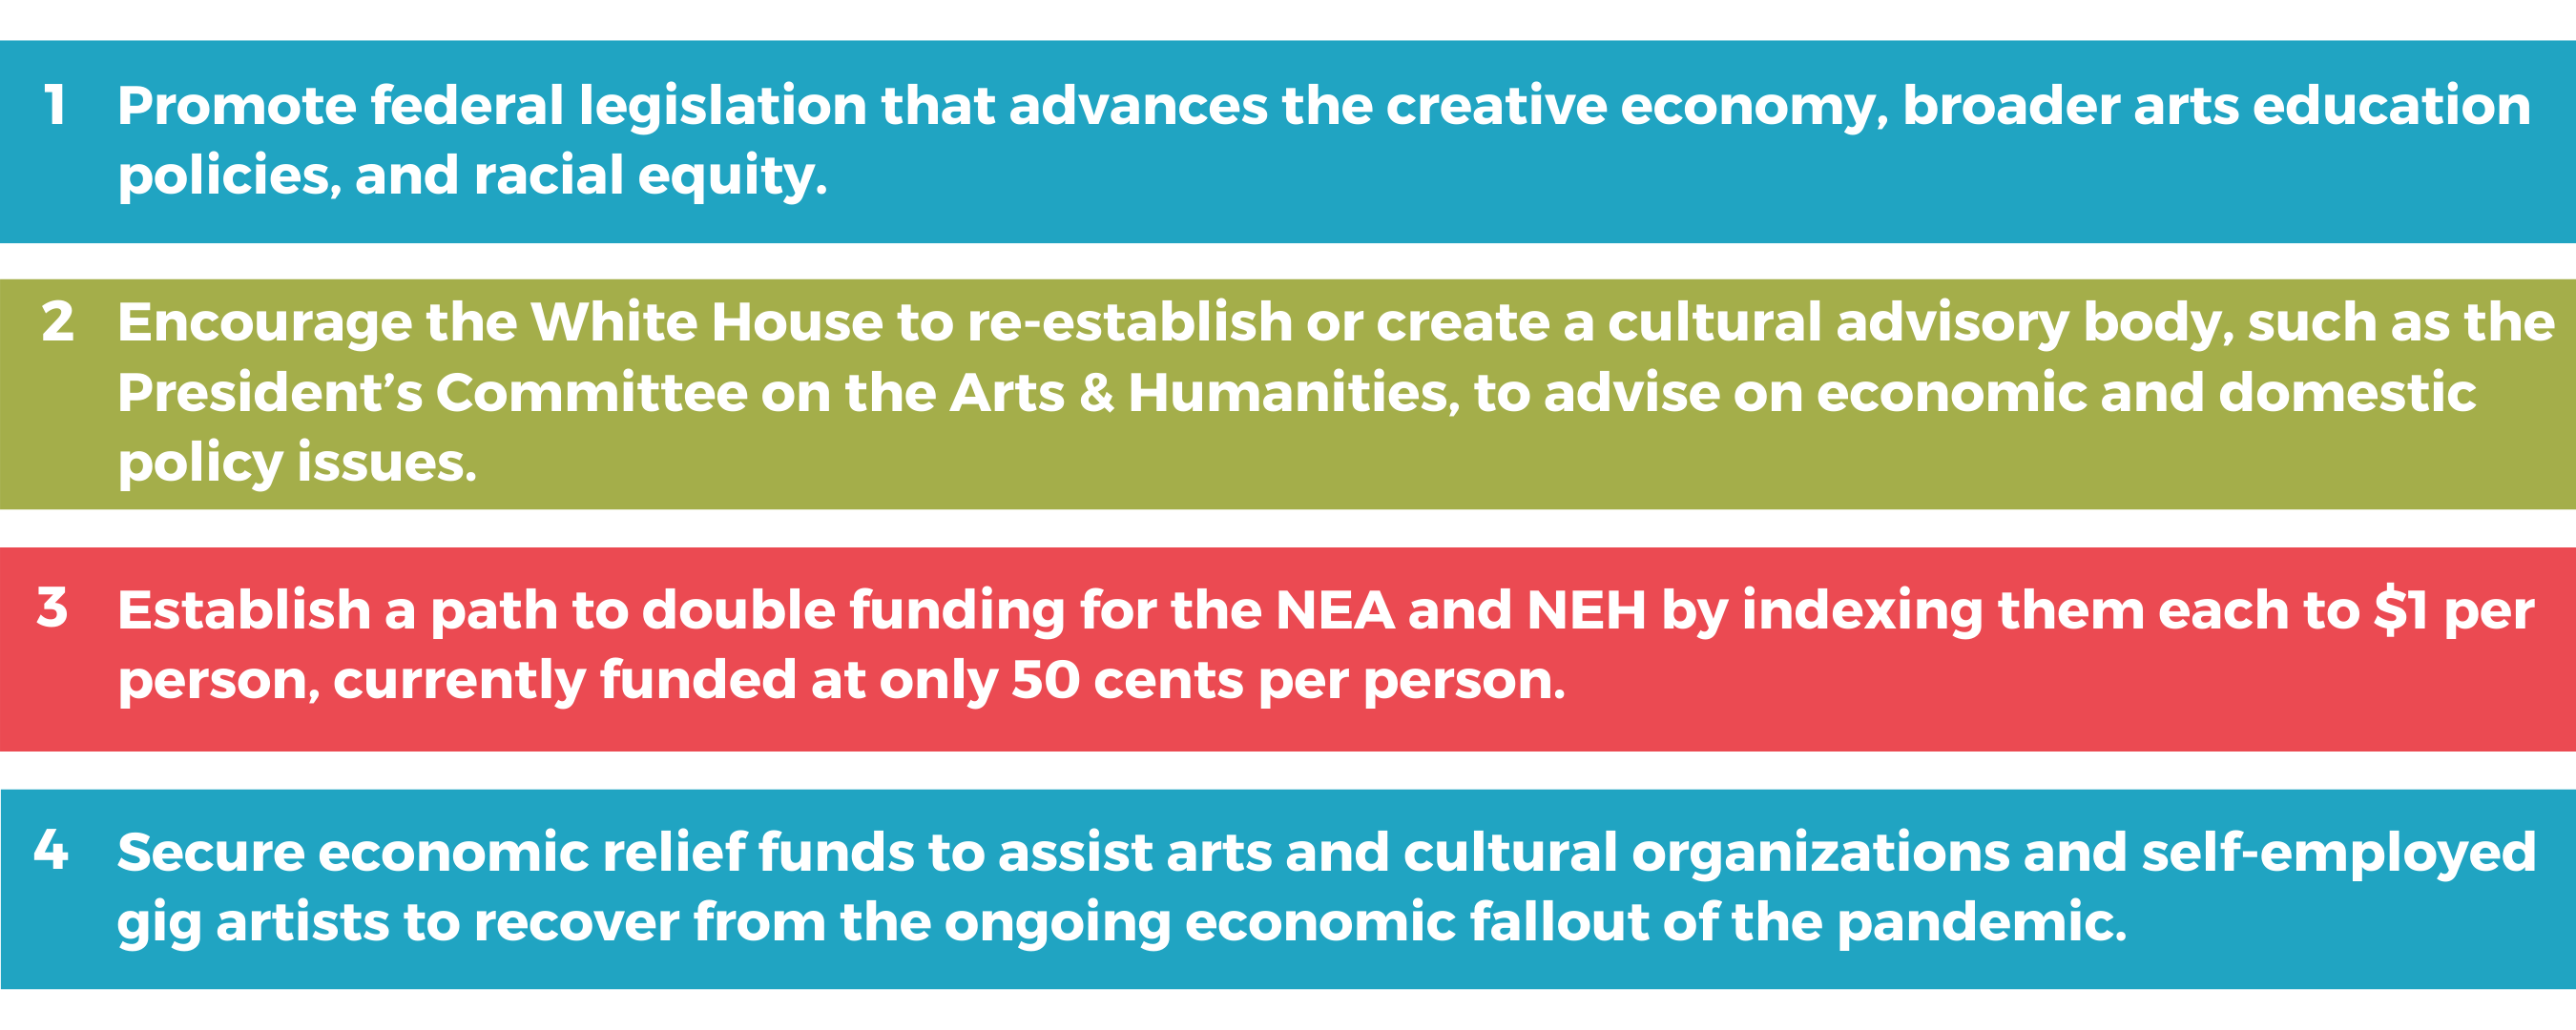 One, Promote federal legislation that advances the creative economy, broader arts education policies, and racial equity. TWO, Encourage the White House to re-establish or create a cultural advisory body, such as the President’s Committee on the Arts & Humanities, to advise on economic and domestic policy issues. THREE, Establish a path to double funding for the NEA and NEH by indexing them each to $1 per person, currently funded at only 50 cents per person. FOUR, Secure economic relief funds to assist arts and cultural organizations and self-employed gig artists to recover from the ongoing economic fallout of the pandemic.